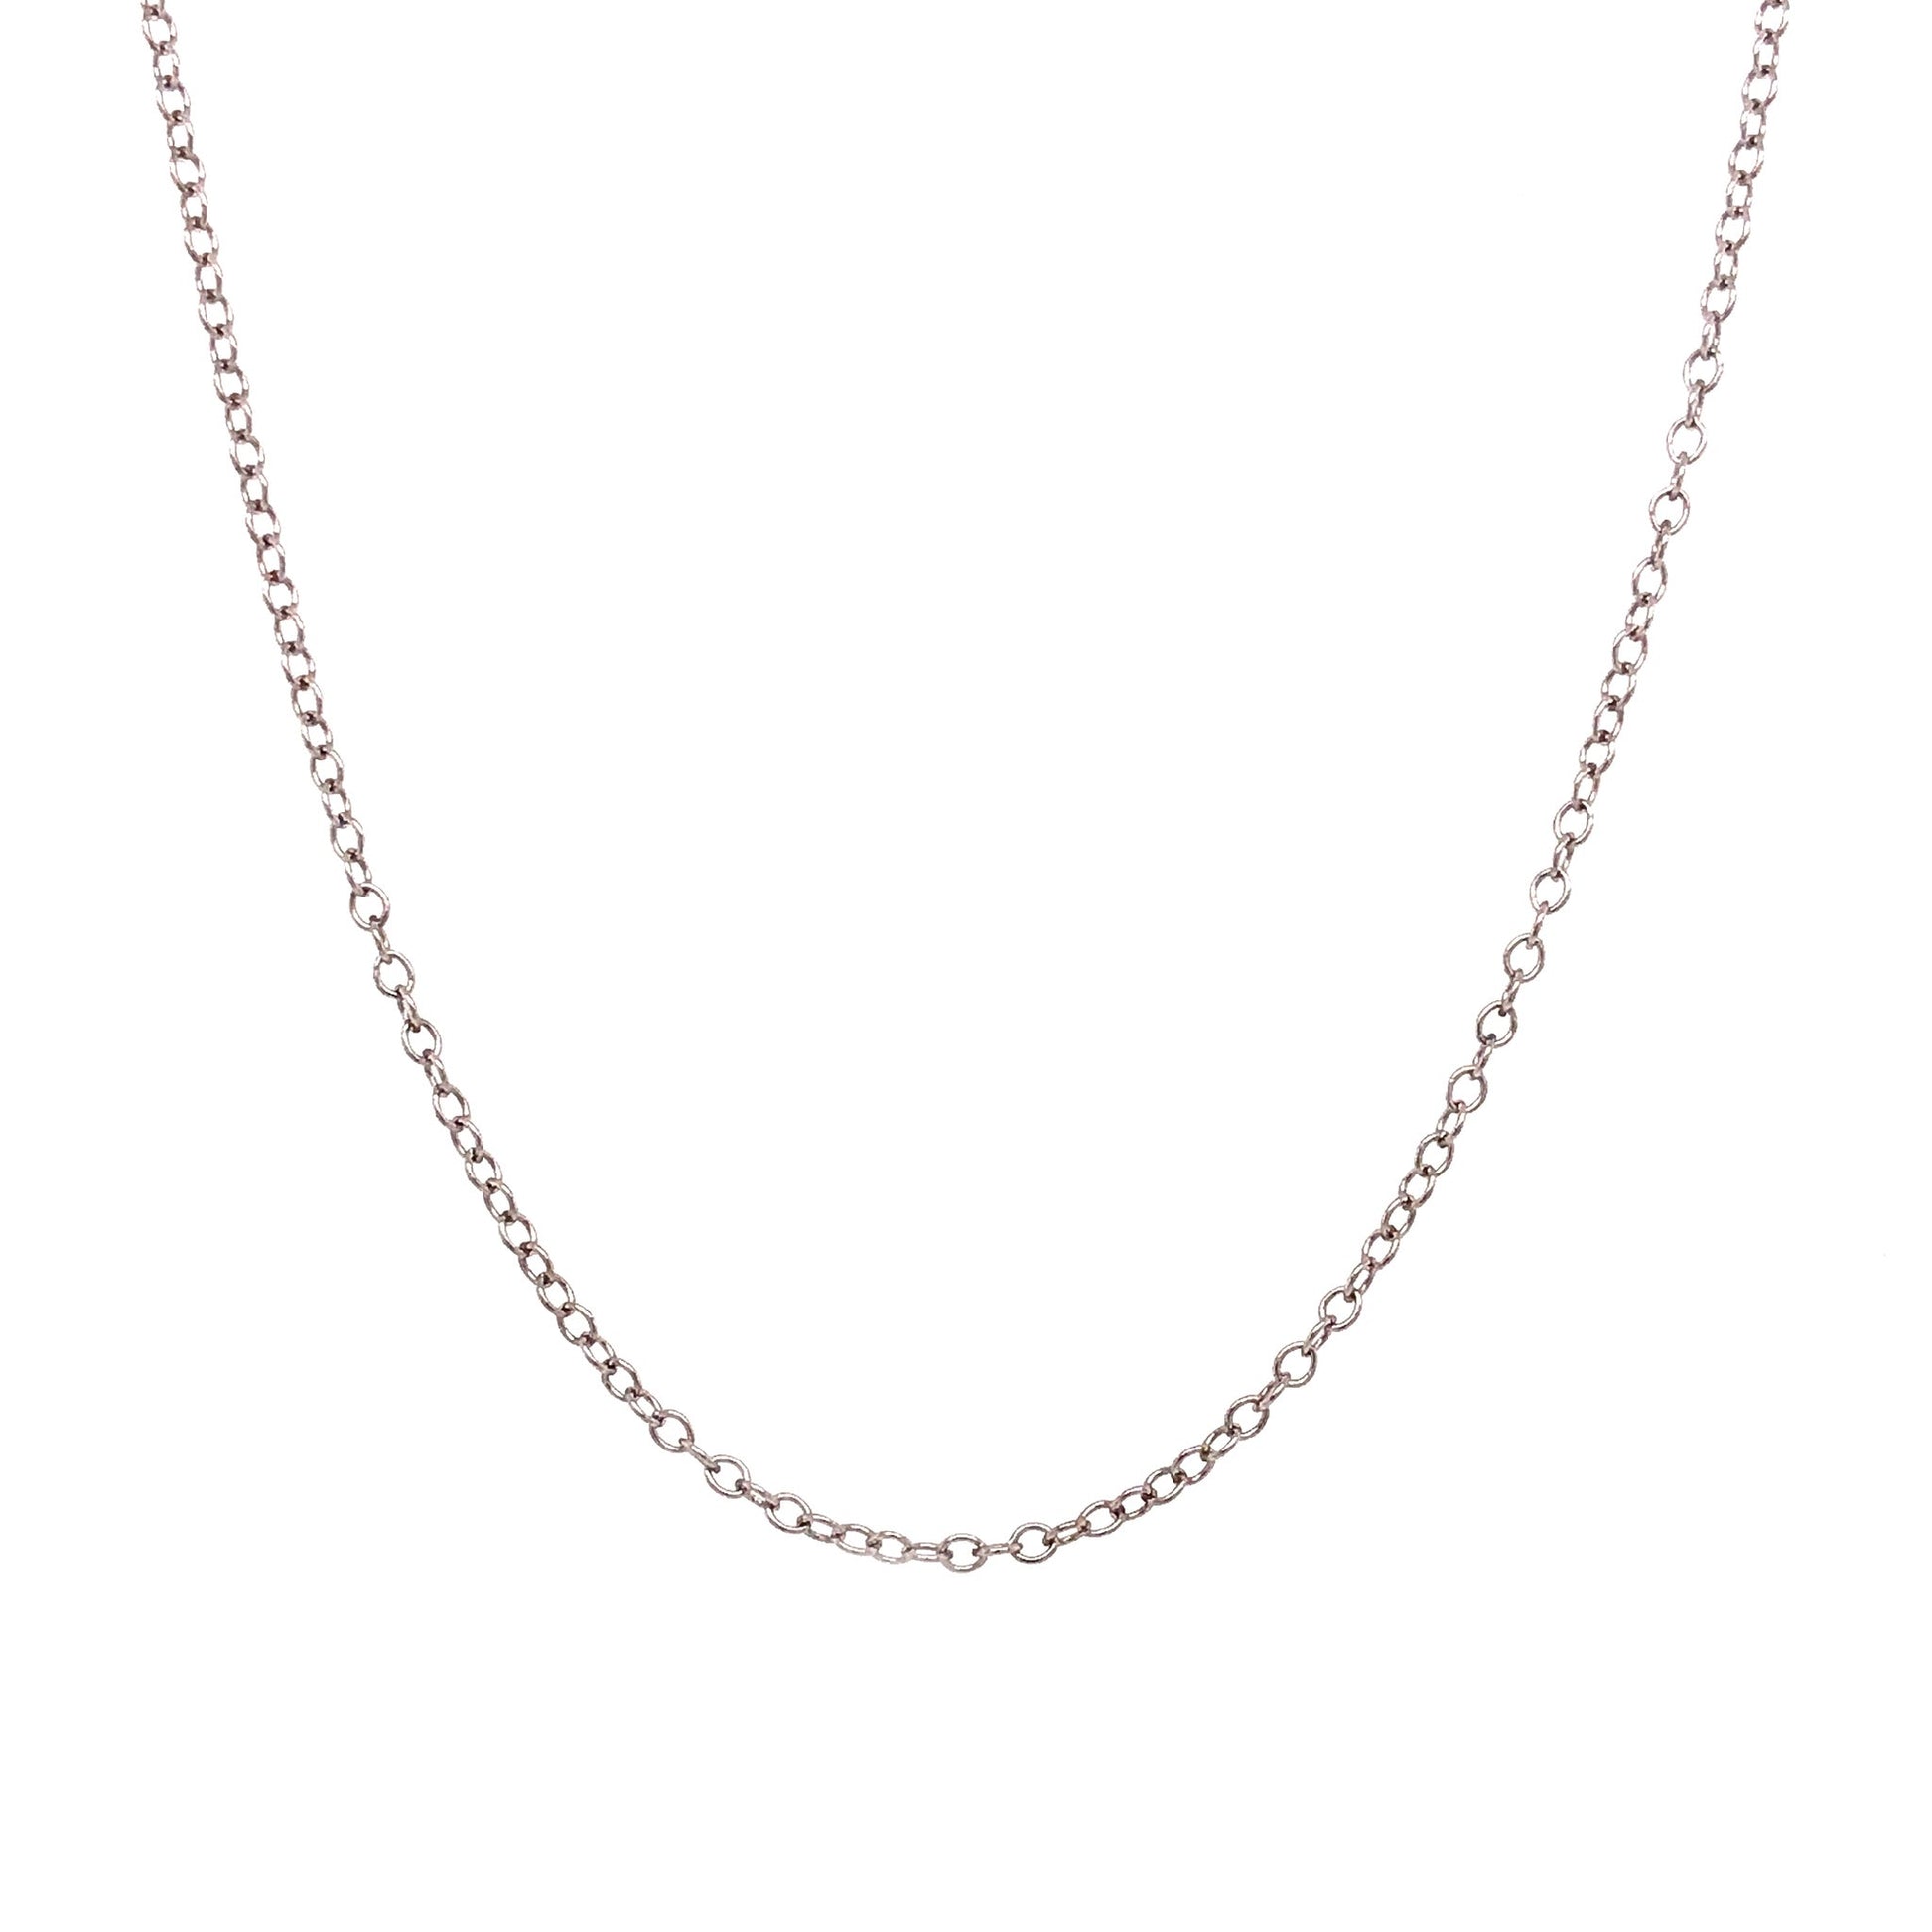 A 18" sterling silver fine cable chain displayed on a neutral white background.